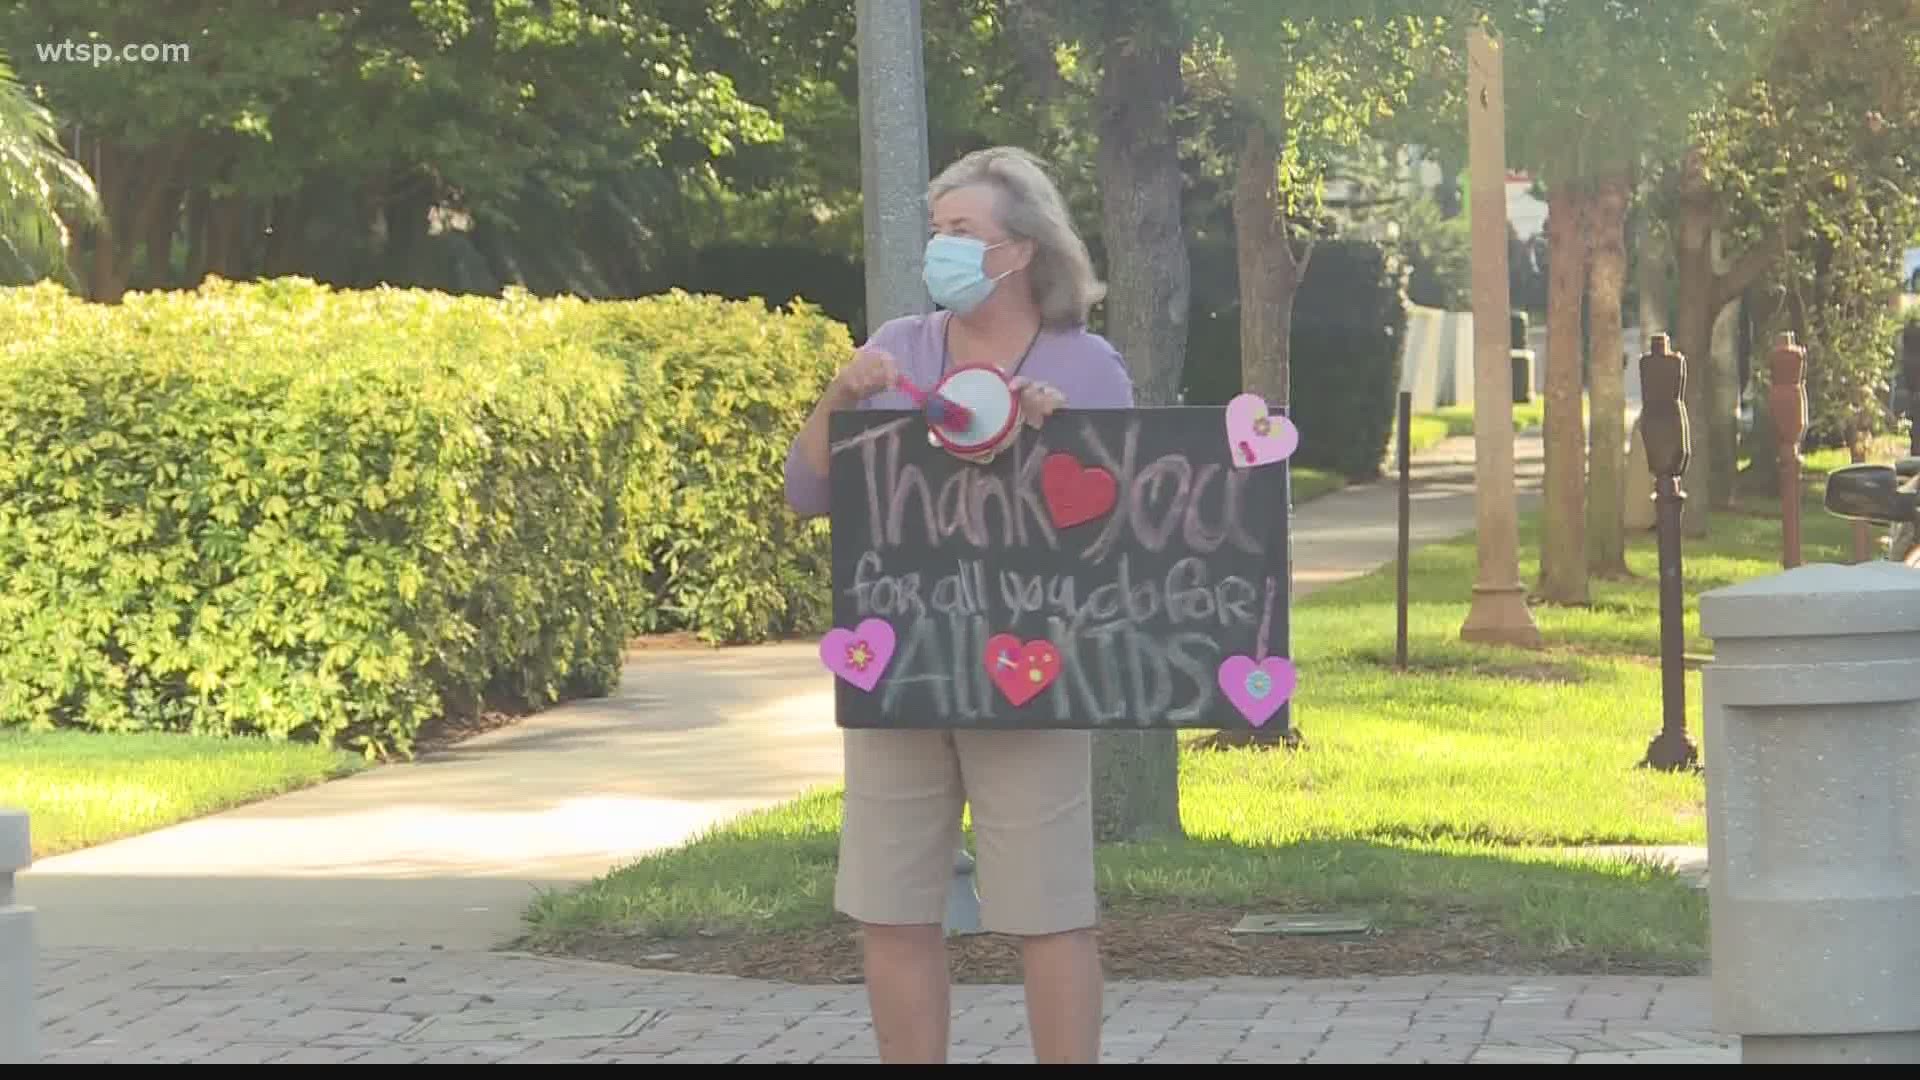 The Tampa Bay community continues to come together and help each other stay positive through the pandemic.